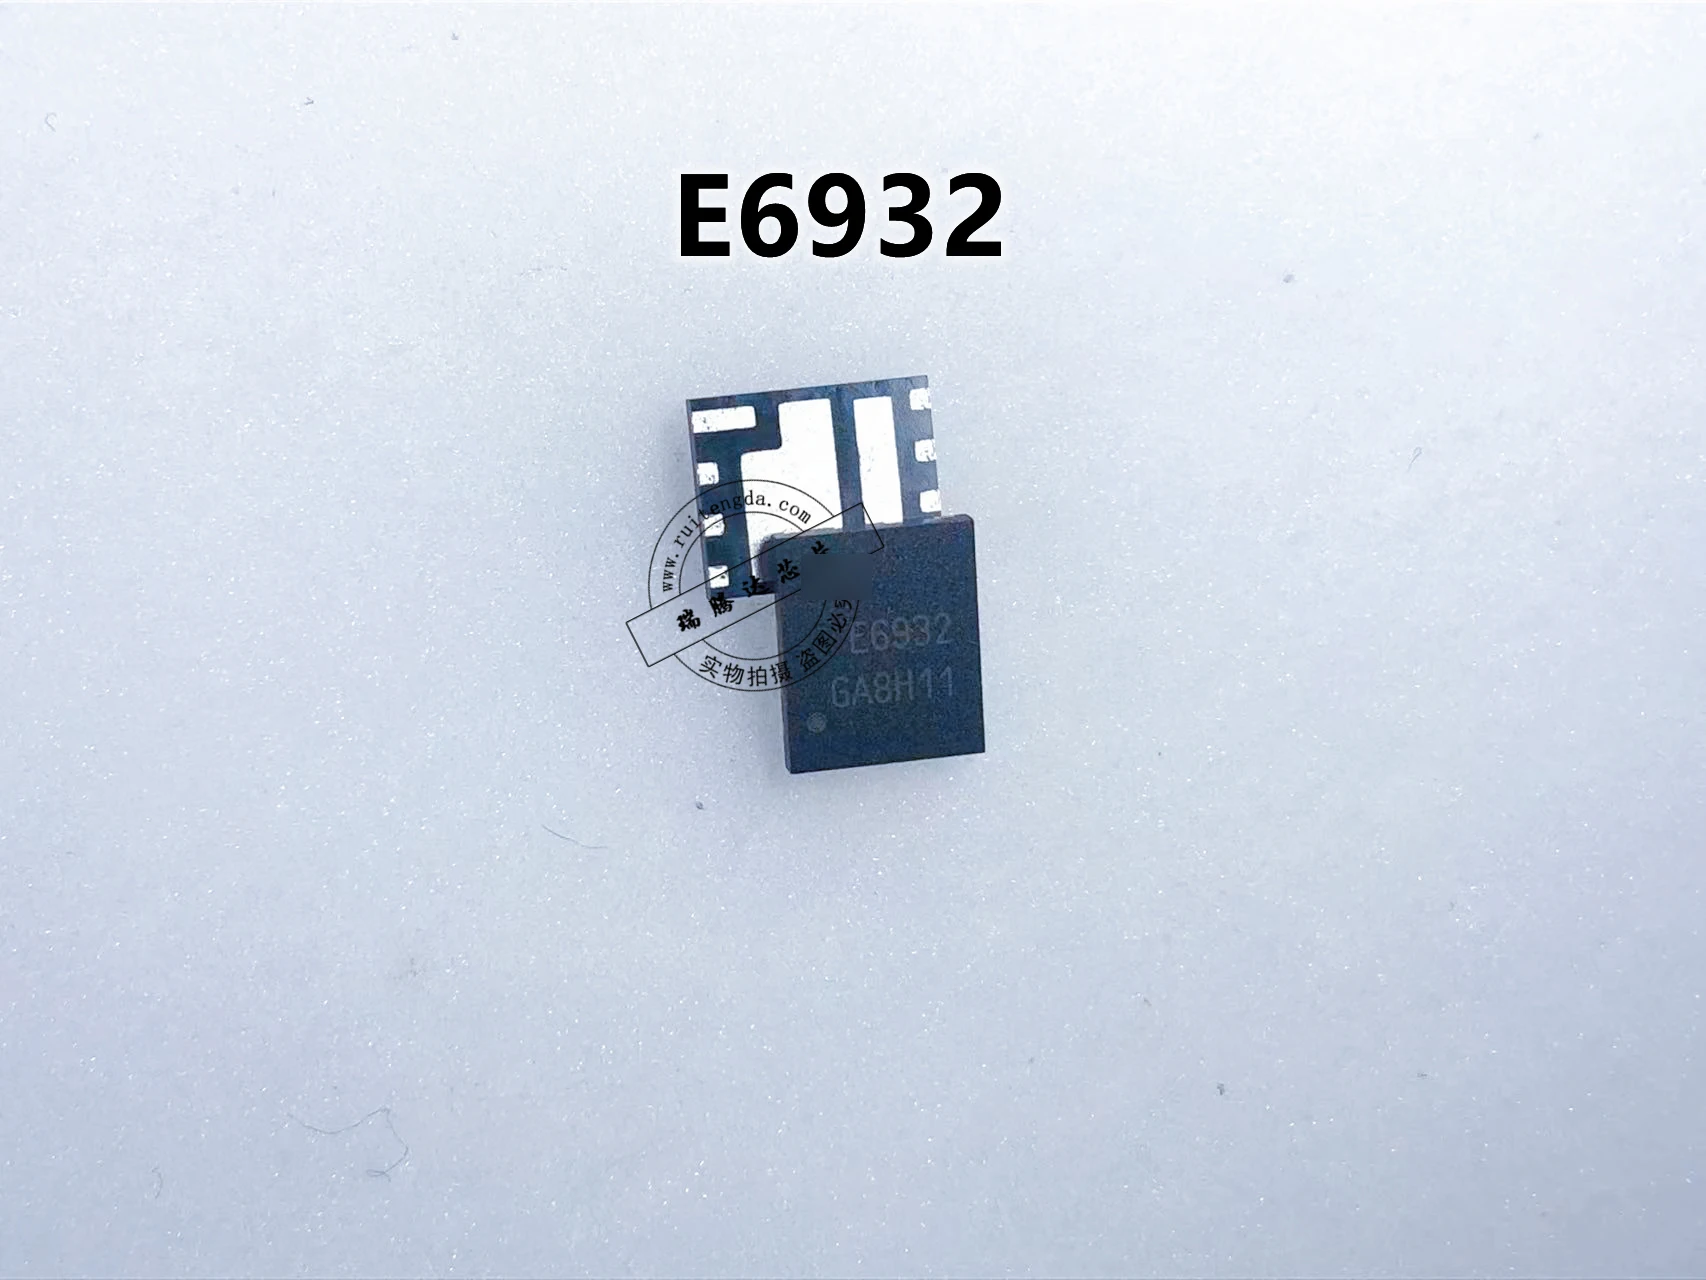 

10PCS/lot AOE6932 E6932 MOSFET QFN-8 100% new imported original IC Chips fast delivery